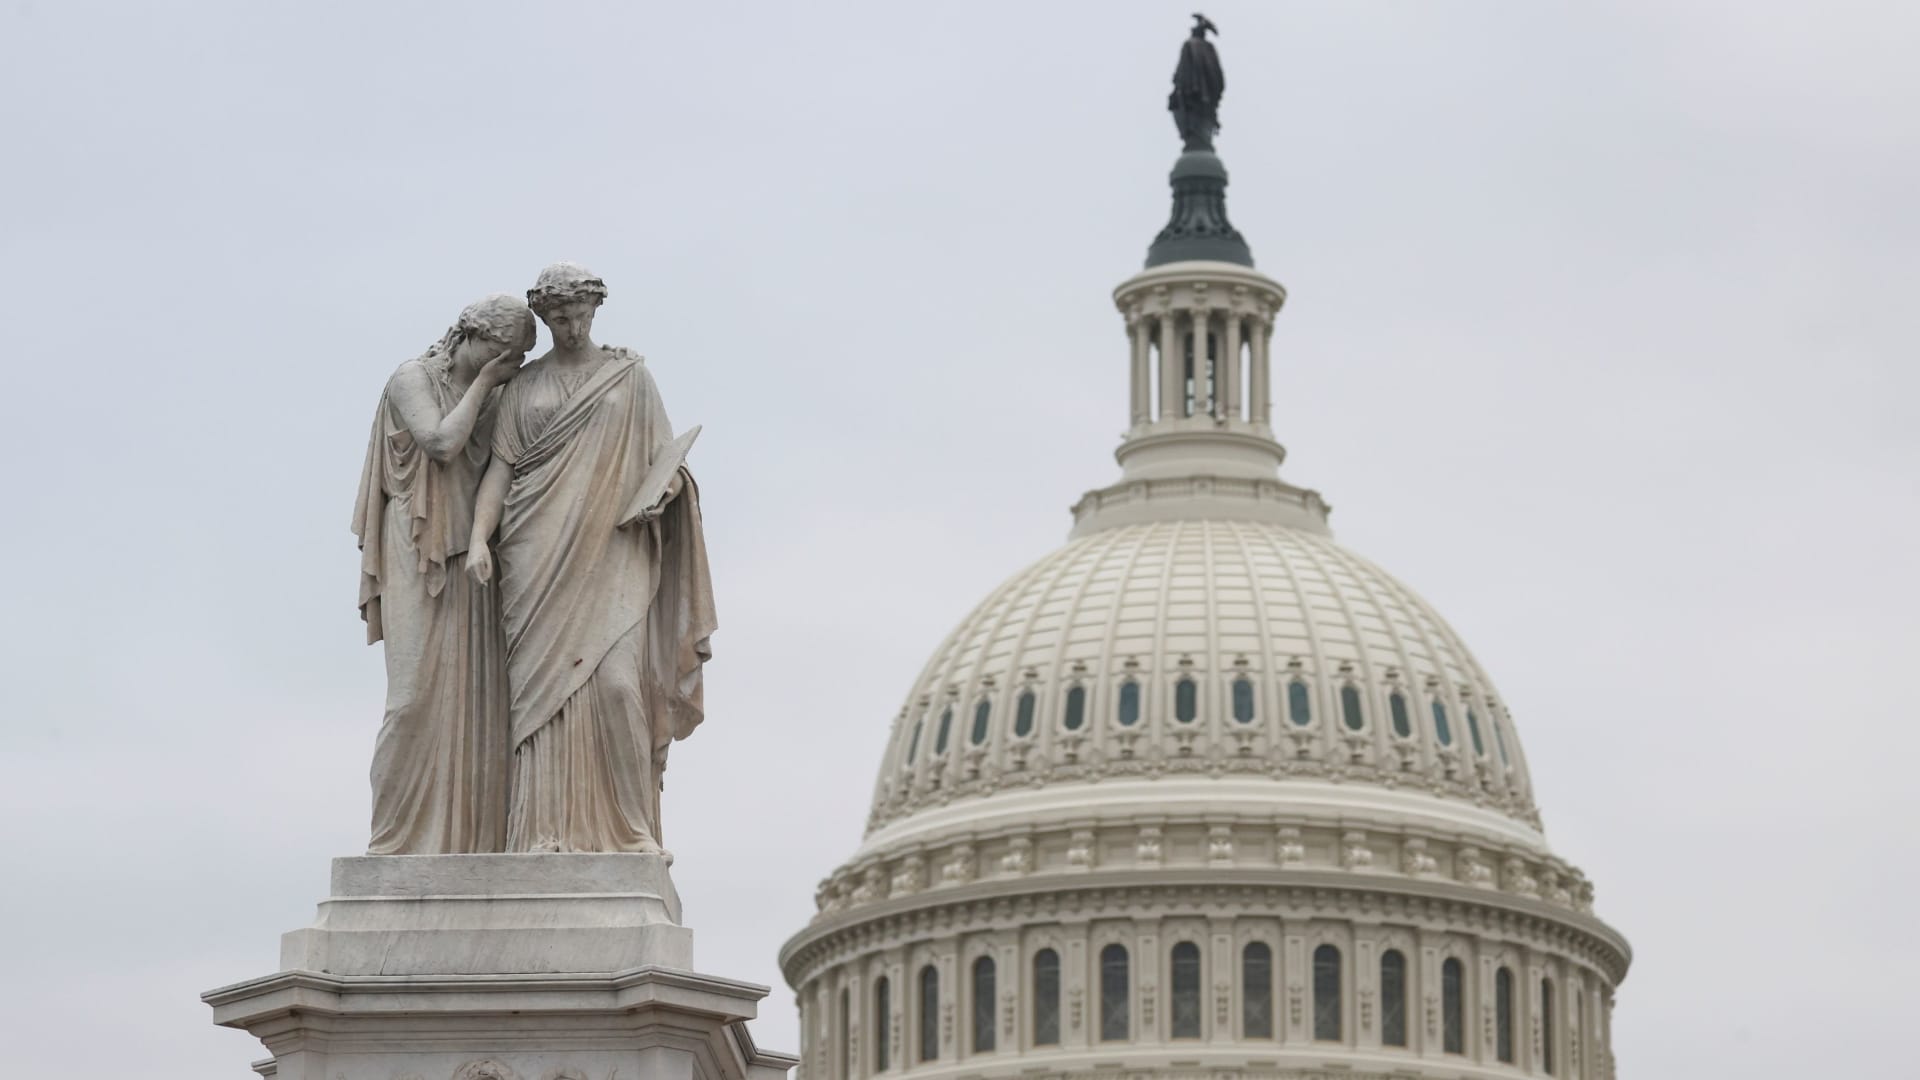 The statue of Grief and History at the Peace Monument is seen in front of the U.S. Capitol dome.